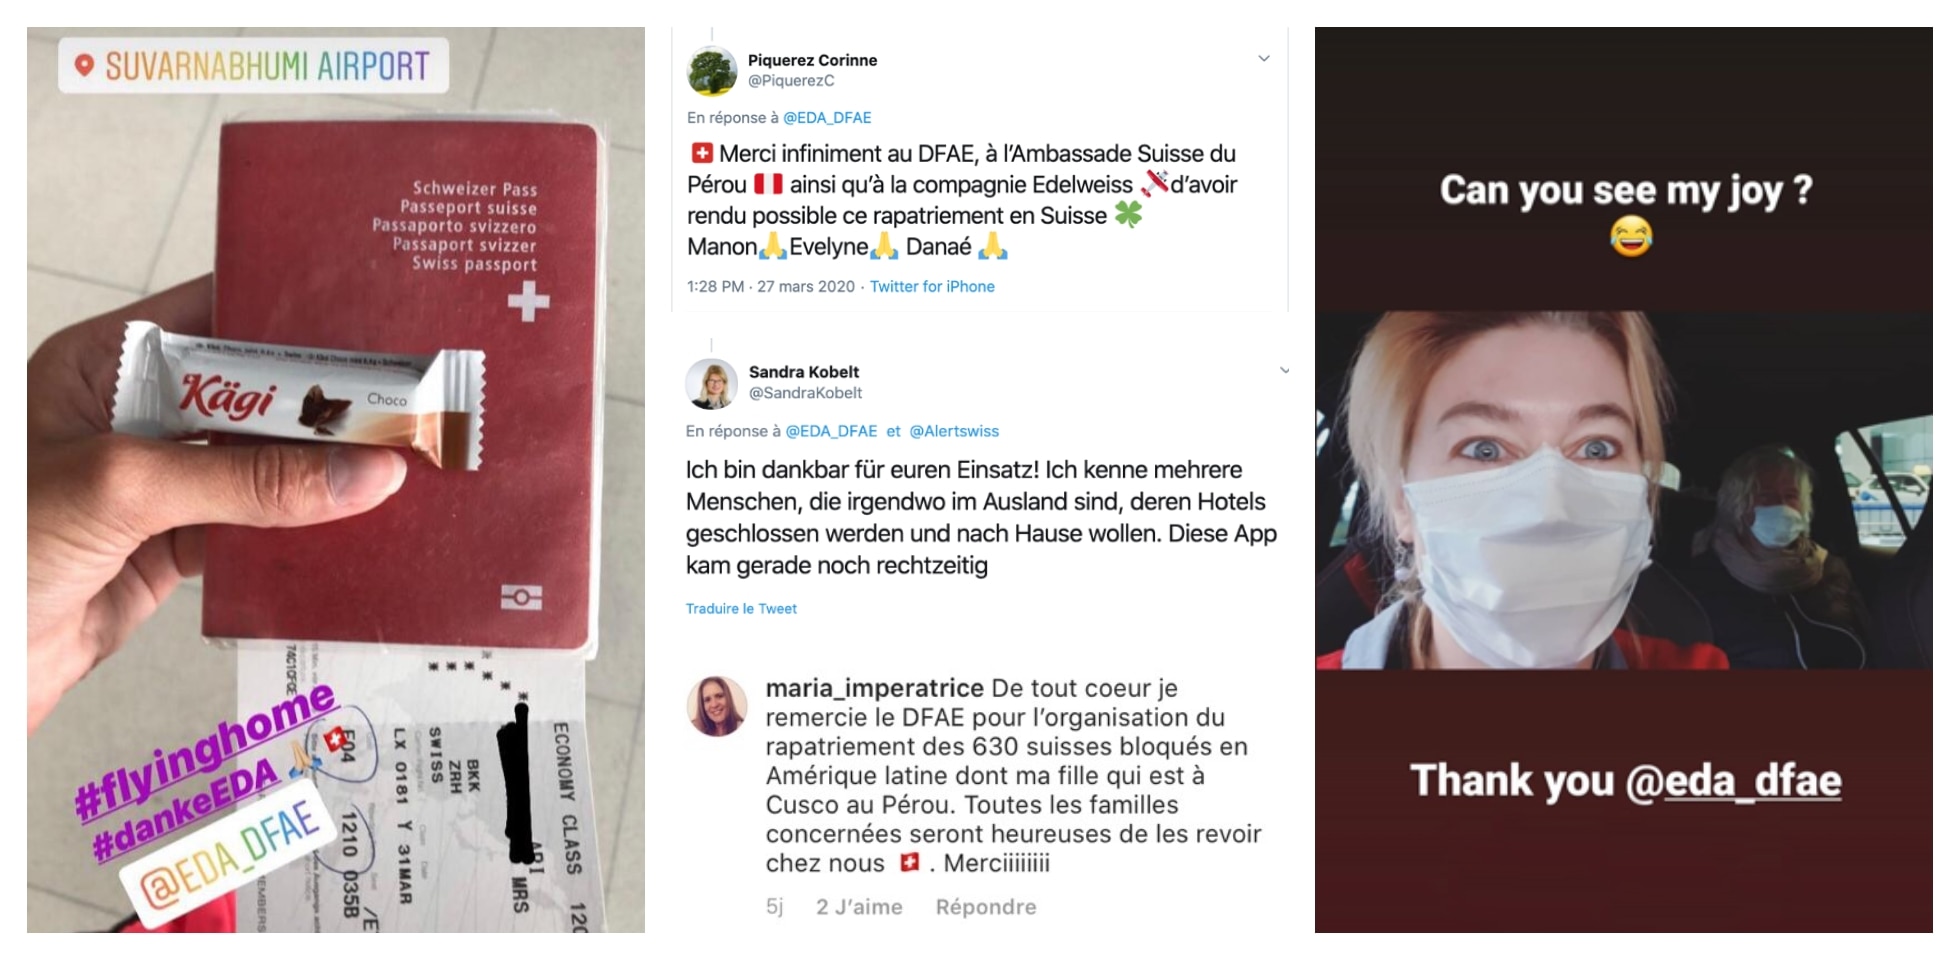 Screenshots of Twitter and Instagram posts in which Swiss travellers thank the FDFA for the rapatriation action.